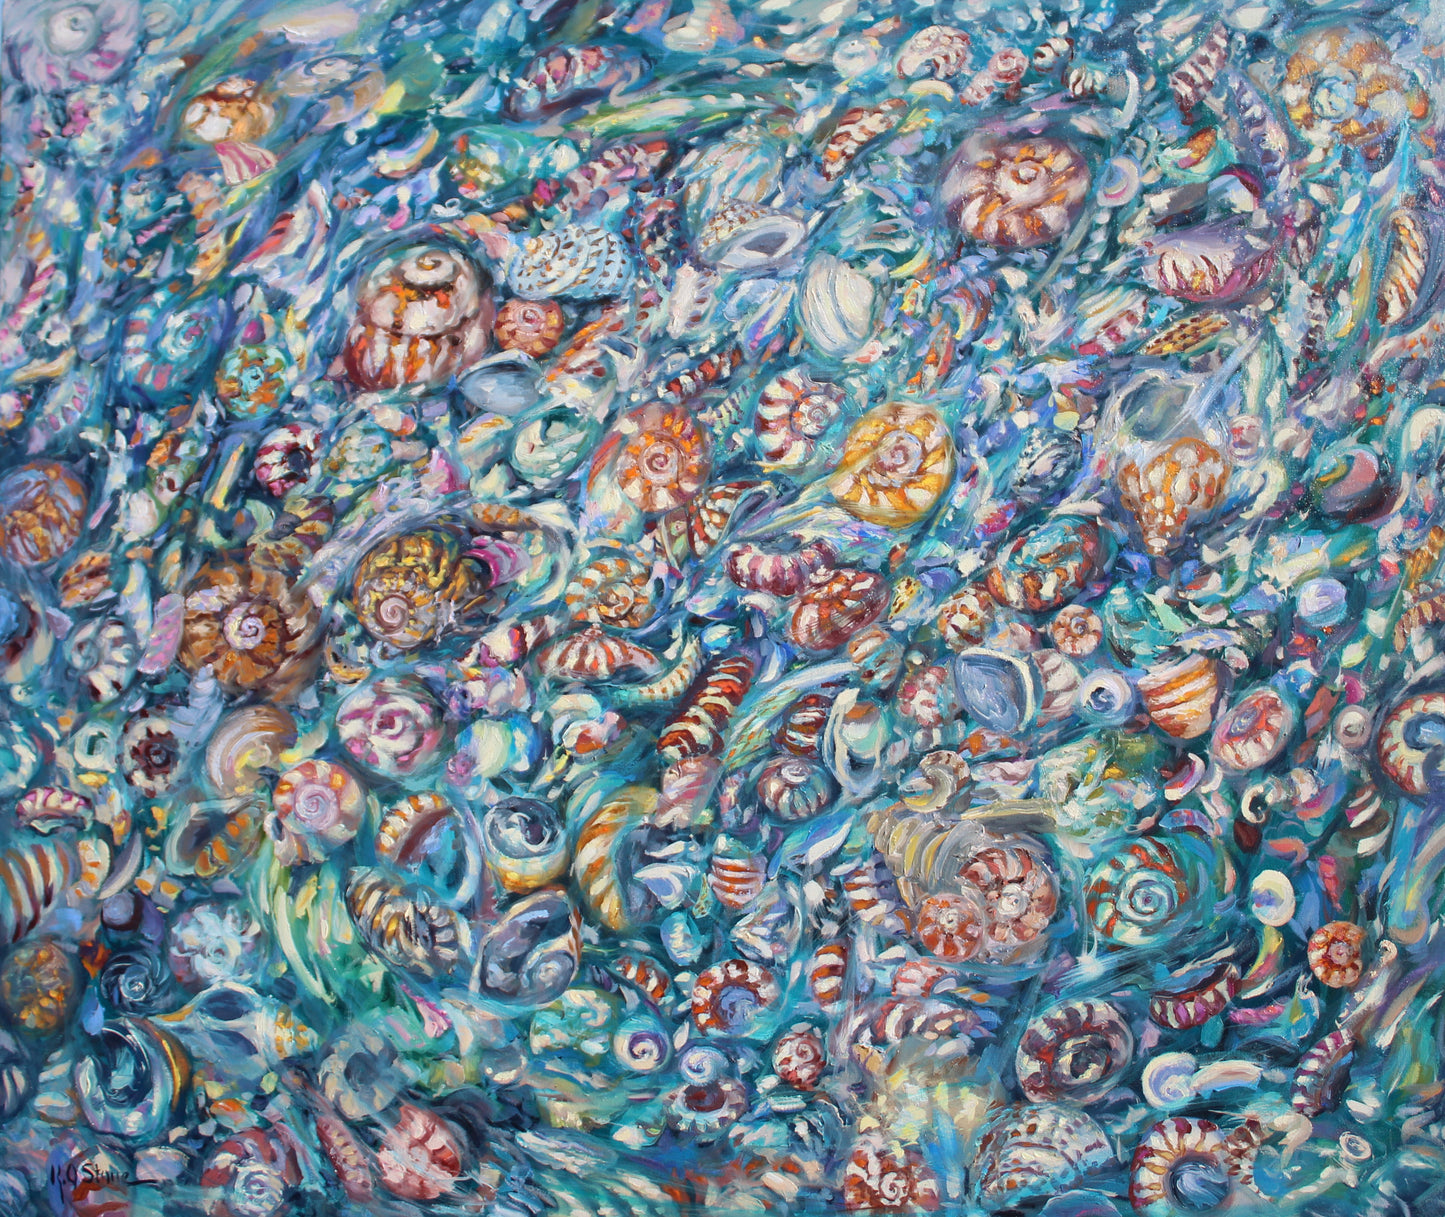 Tide Pool V, An Original 32" x 38" Highly Detailed Seashell Oil Painting On Canvas With Turquoise Water